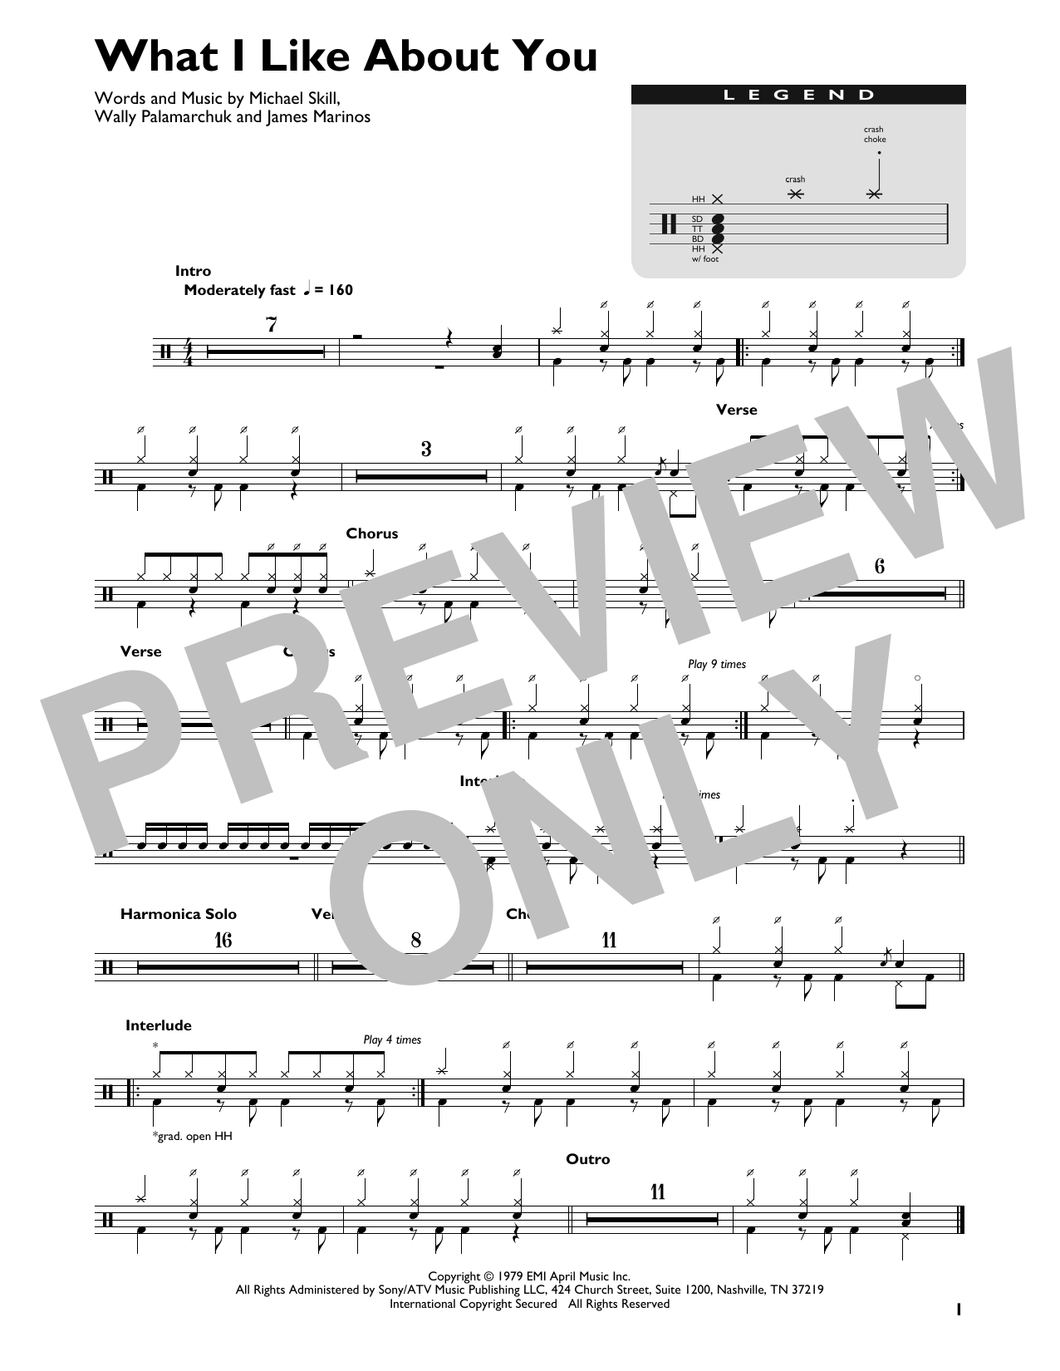 What I Like About You - The Romantics - Full Drum Transcription / Drum Sheet Music - SheetMusicDirect DT